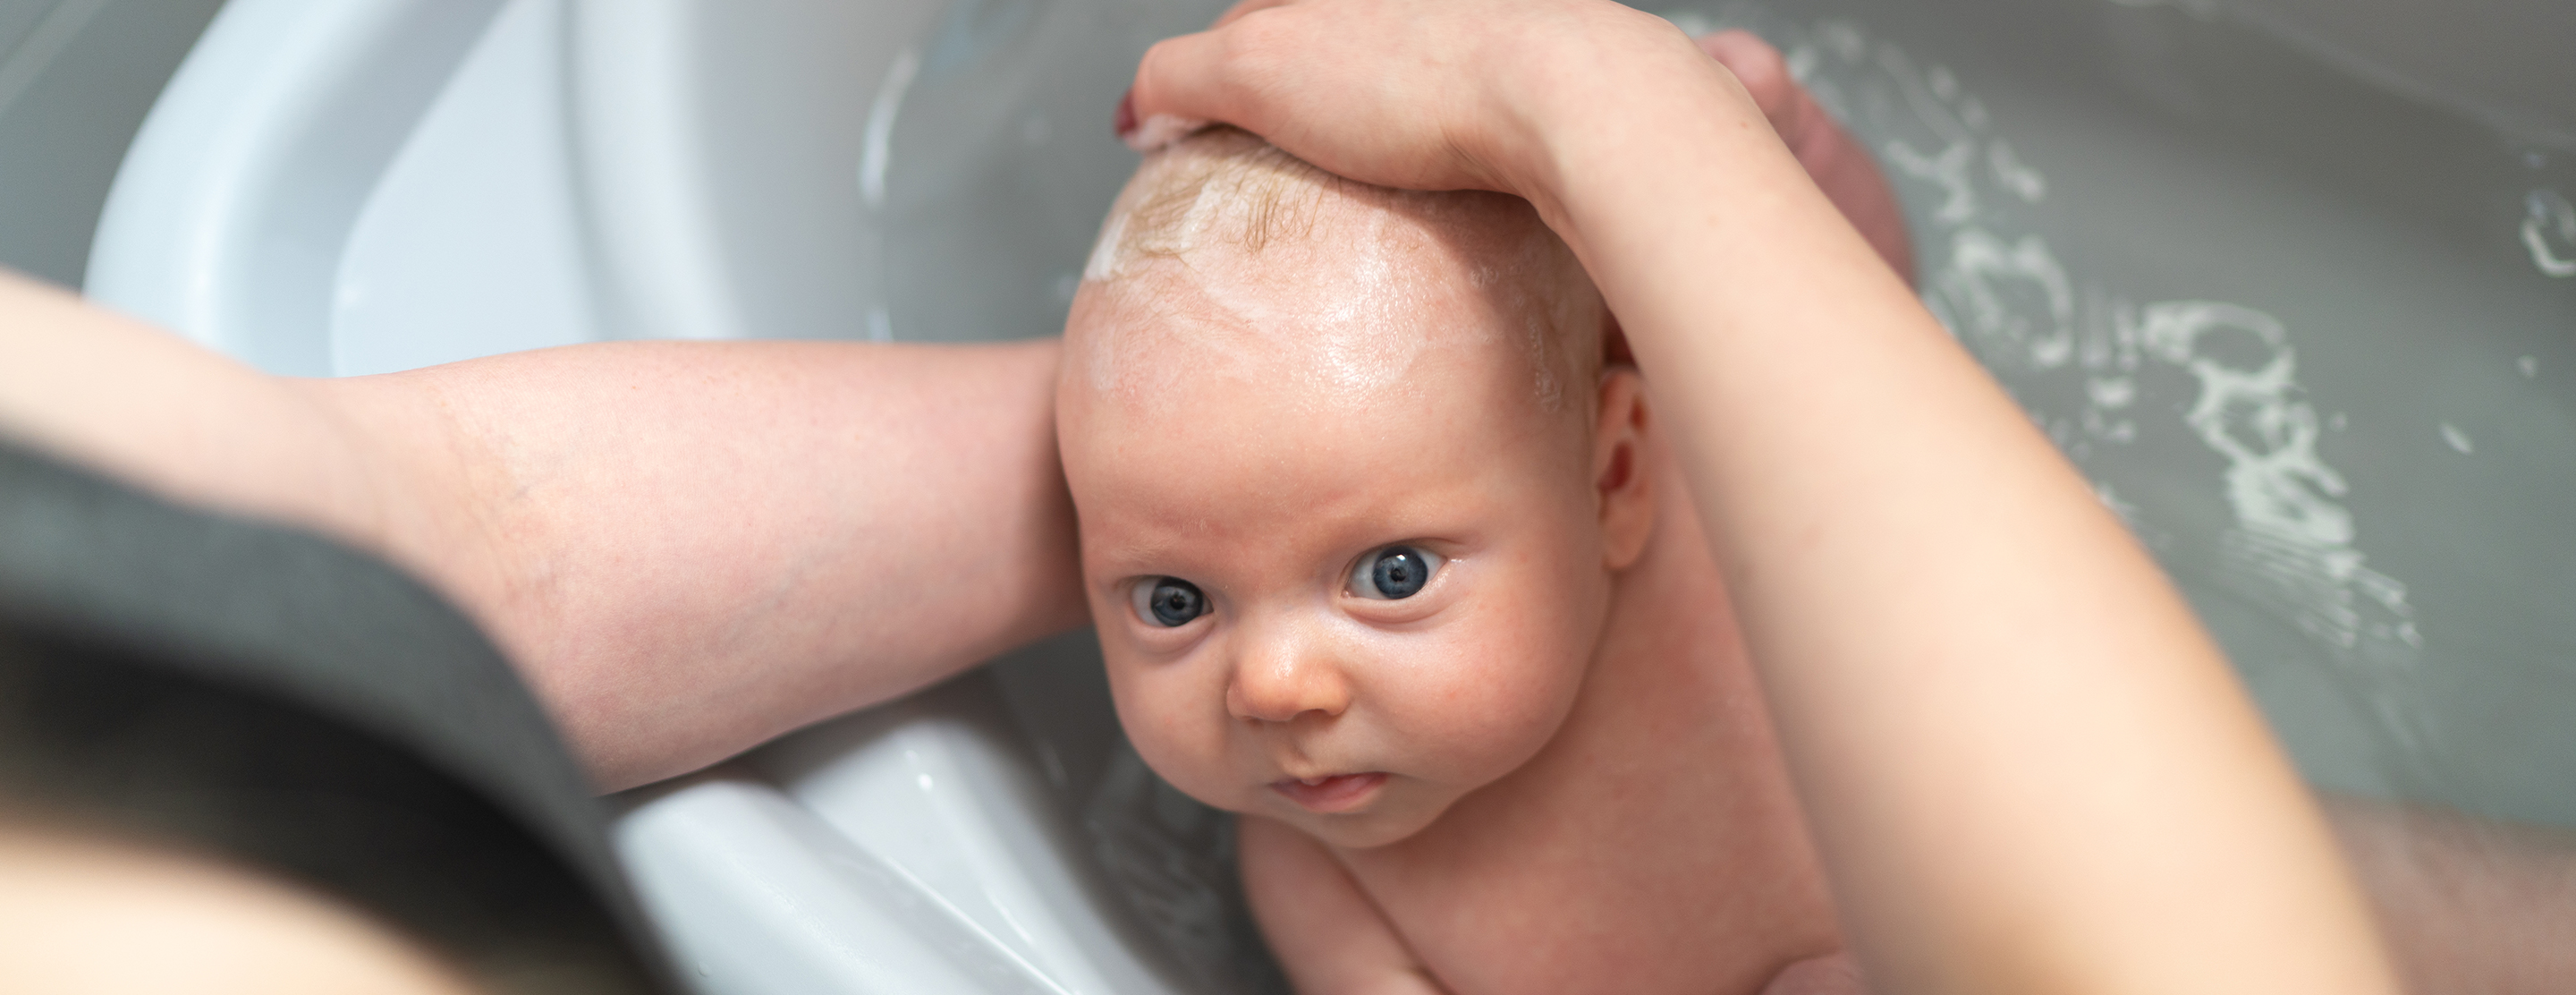 Parents Who Shower With Their Kids: Benefits and When to Stop